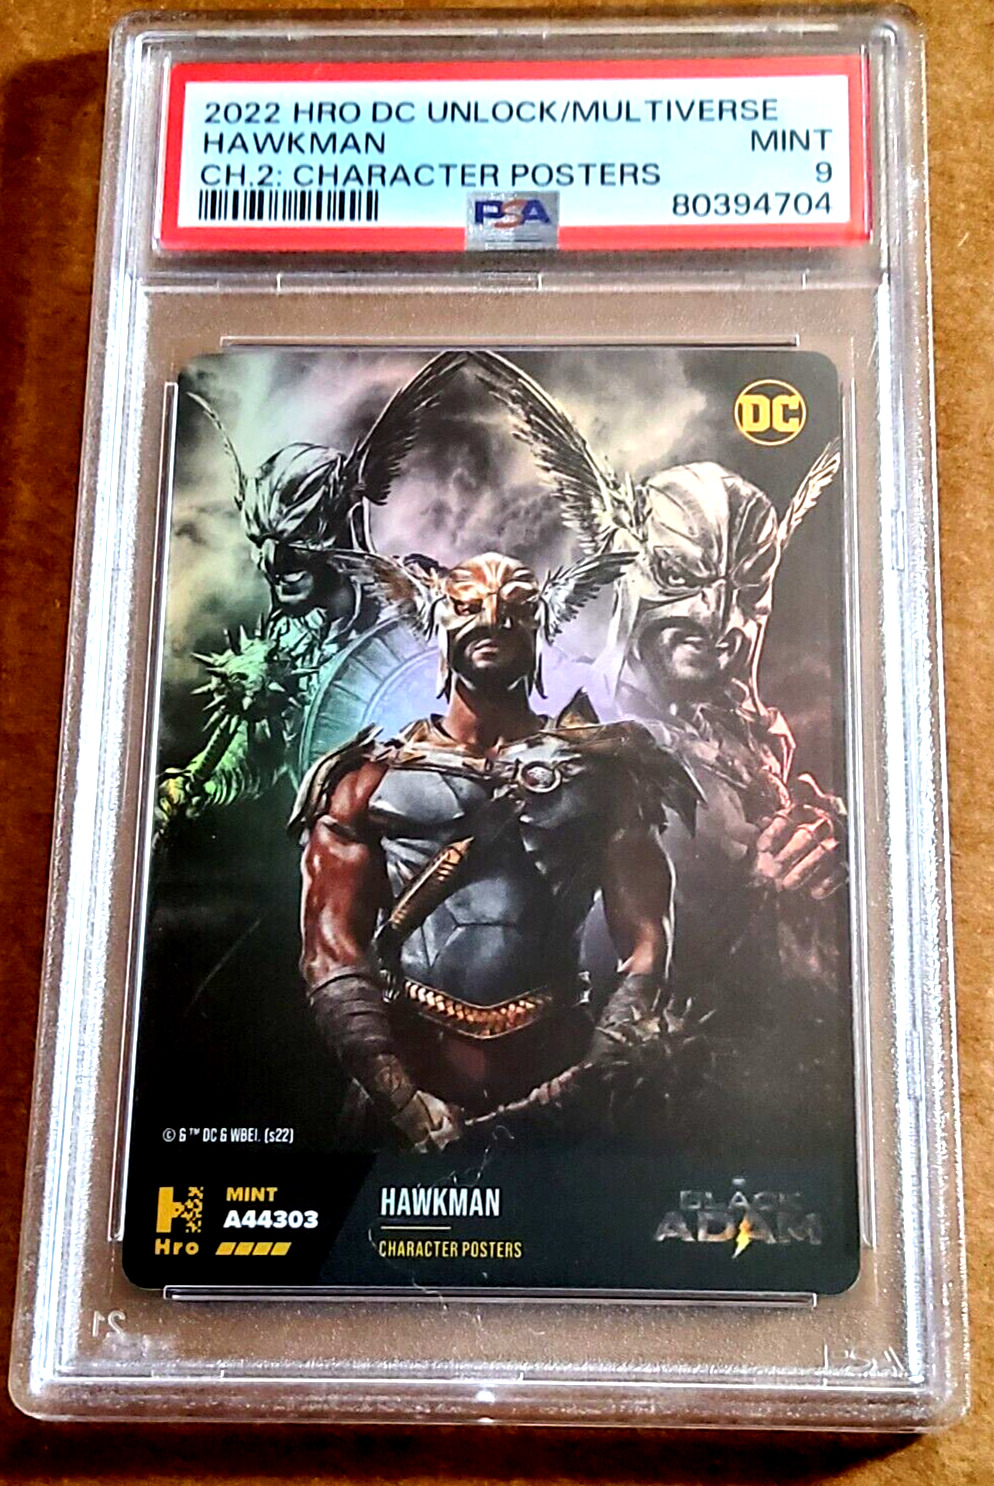 2022 HRO Chapter 2 HAWMAN Holo Physical (Card Only) PSA 9 Mint